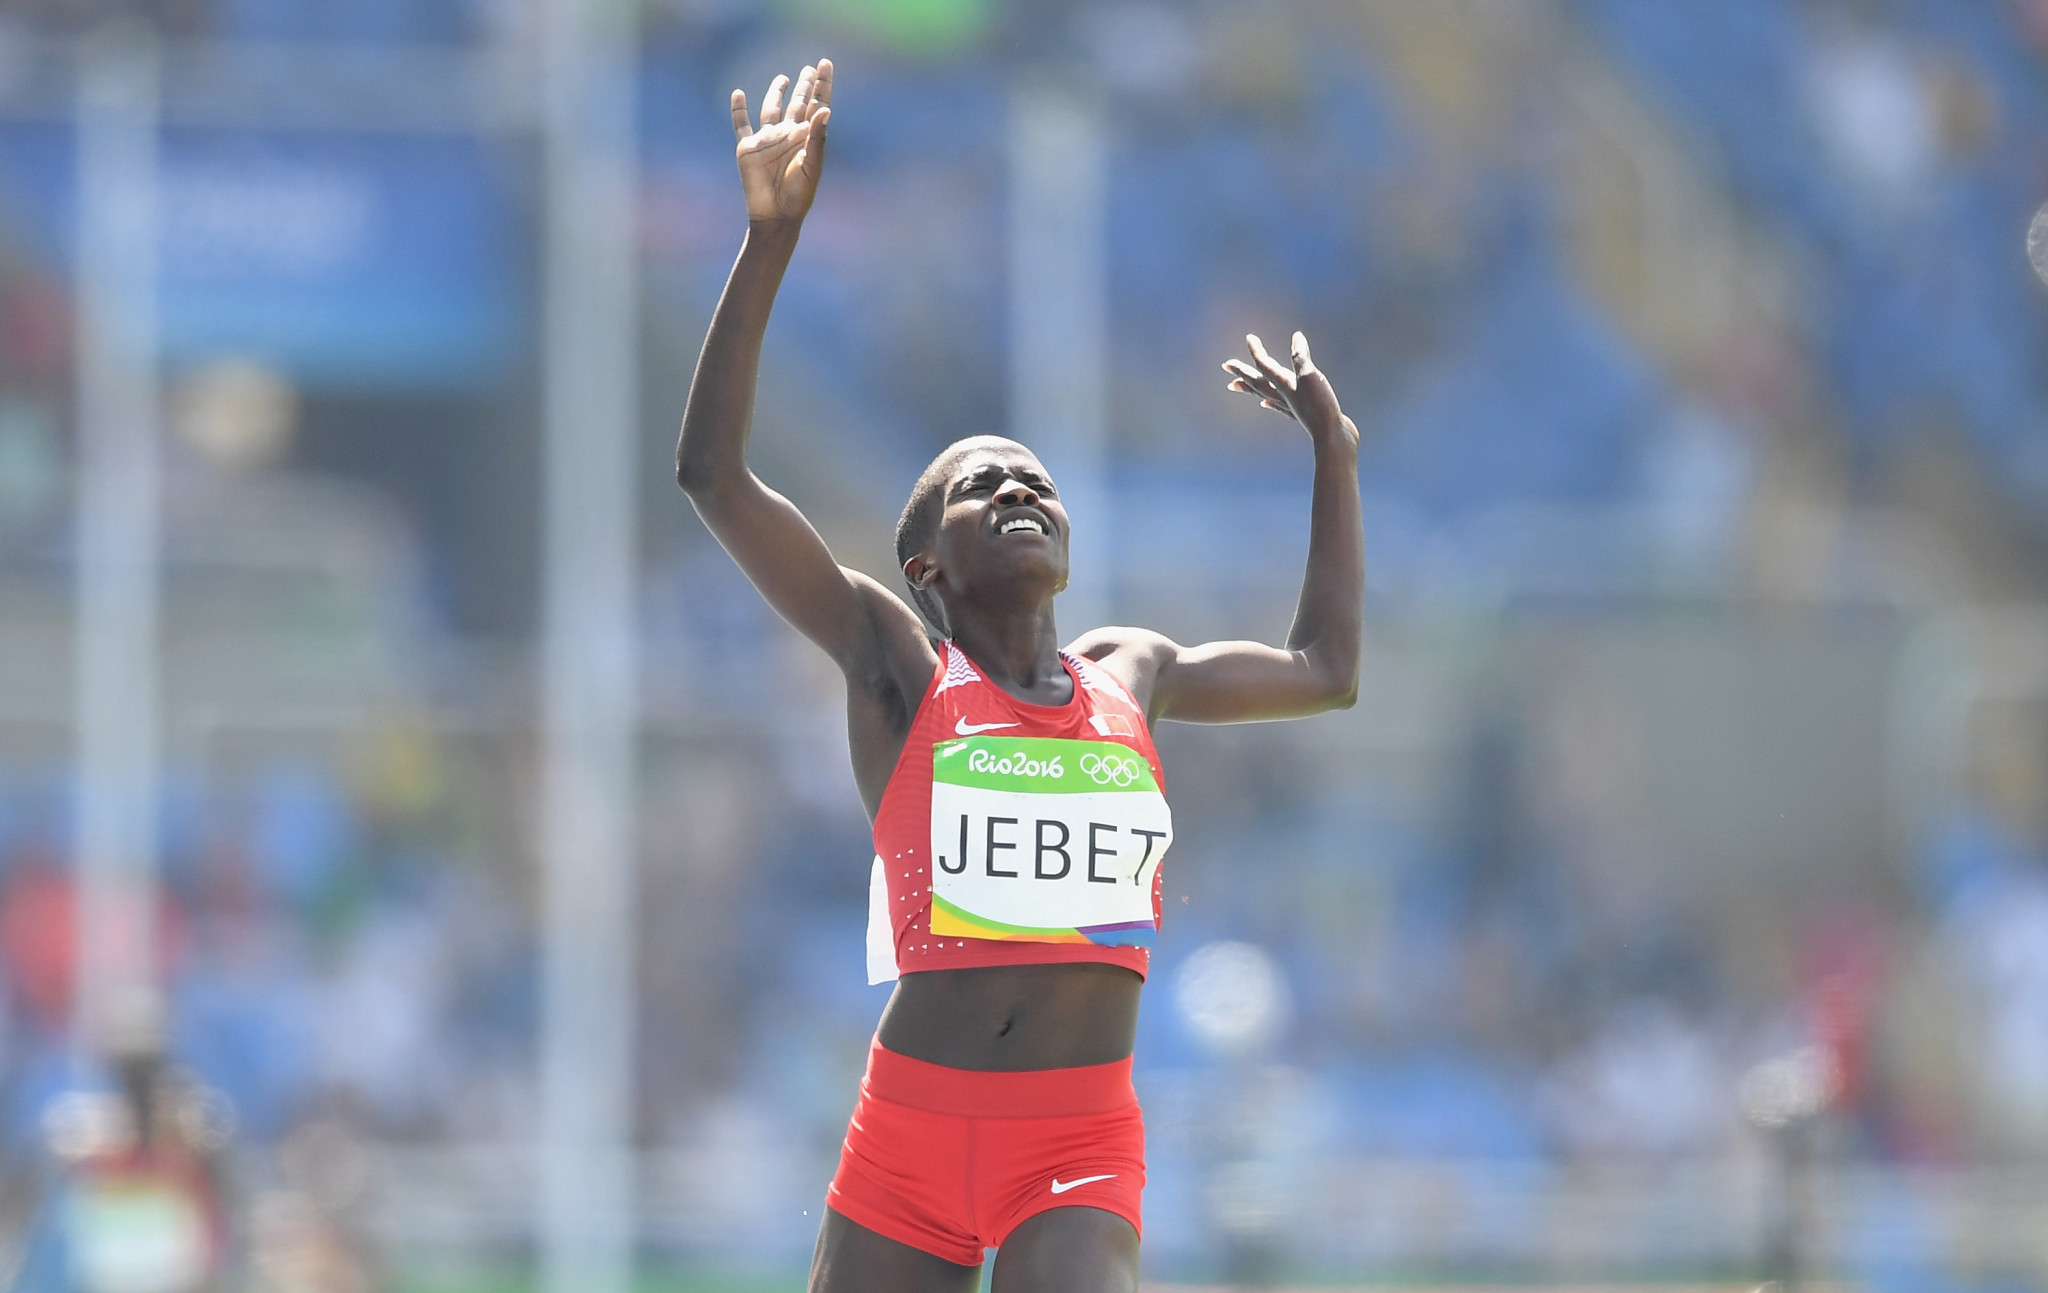 Olympic steeplechase champion Jebet reportedly fails drugs test